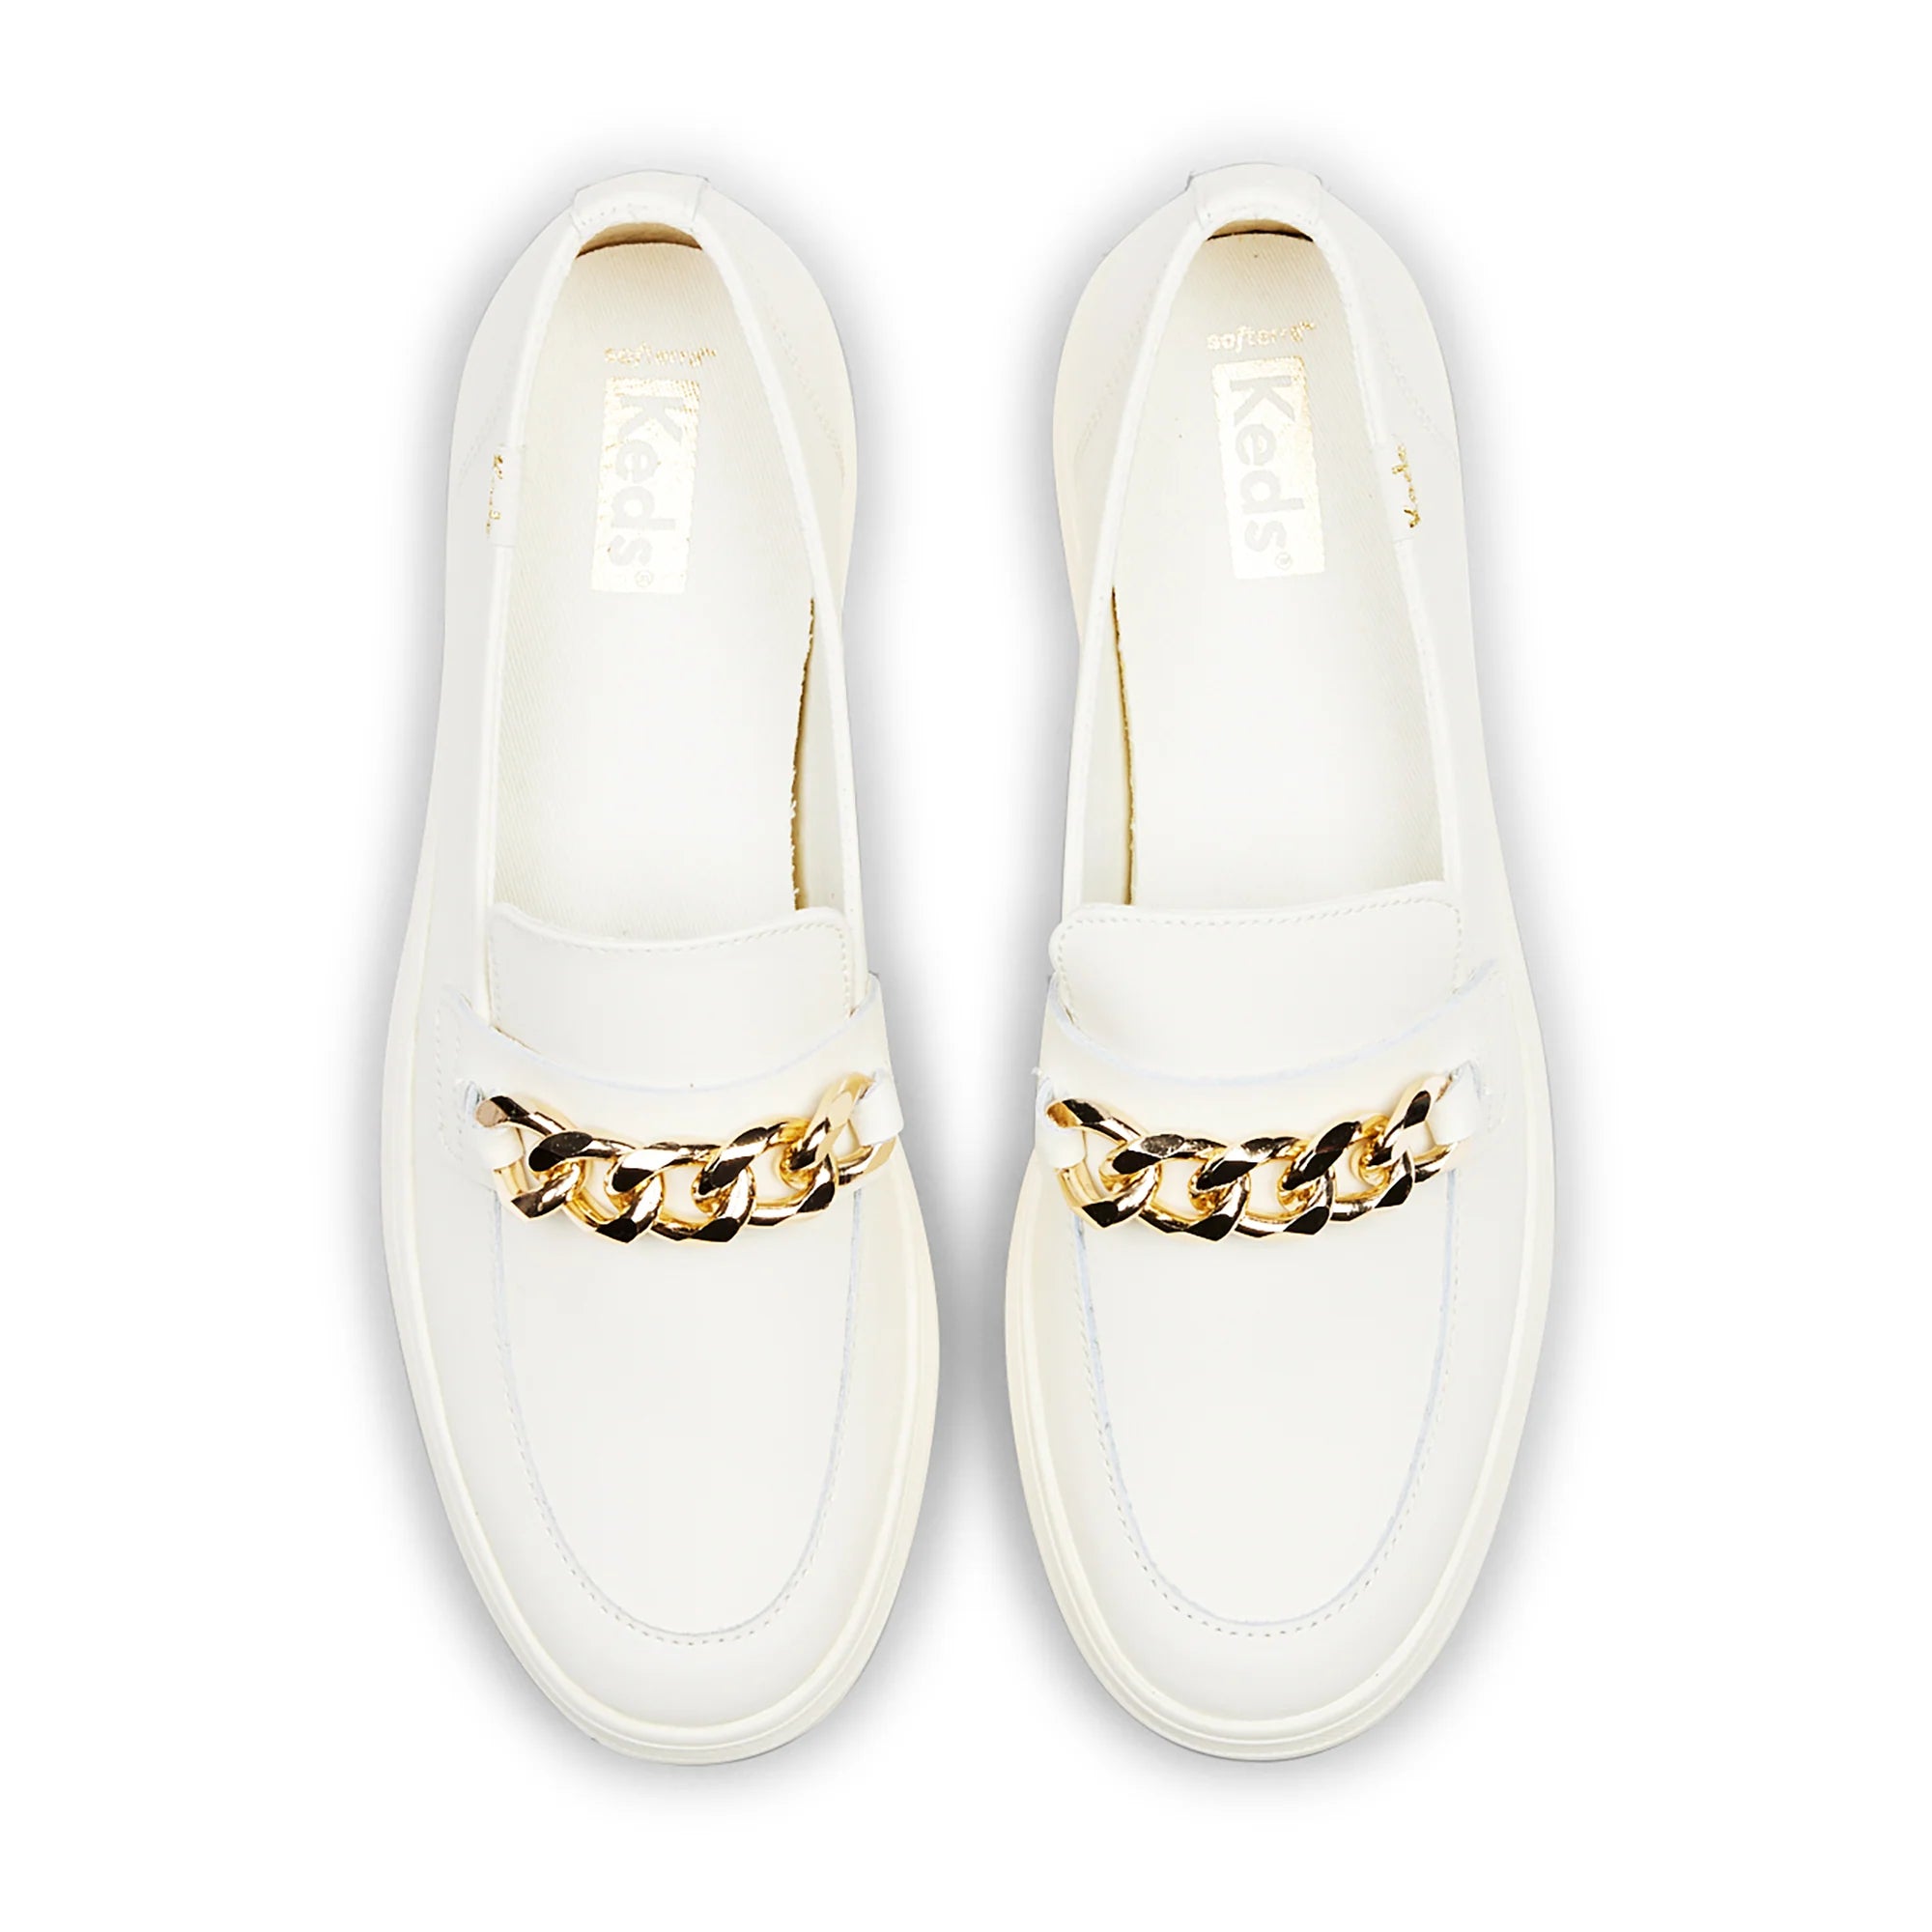 KEDS - Triple Decker Loafer - Leather - White/Gold